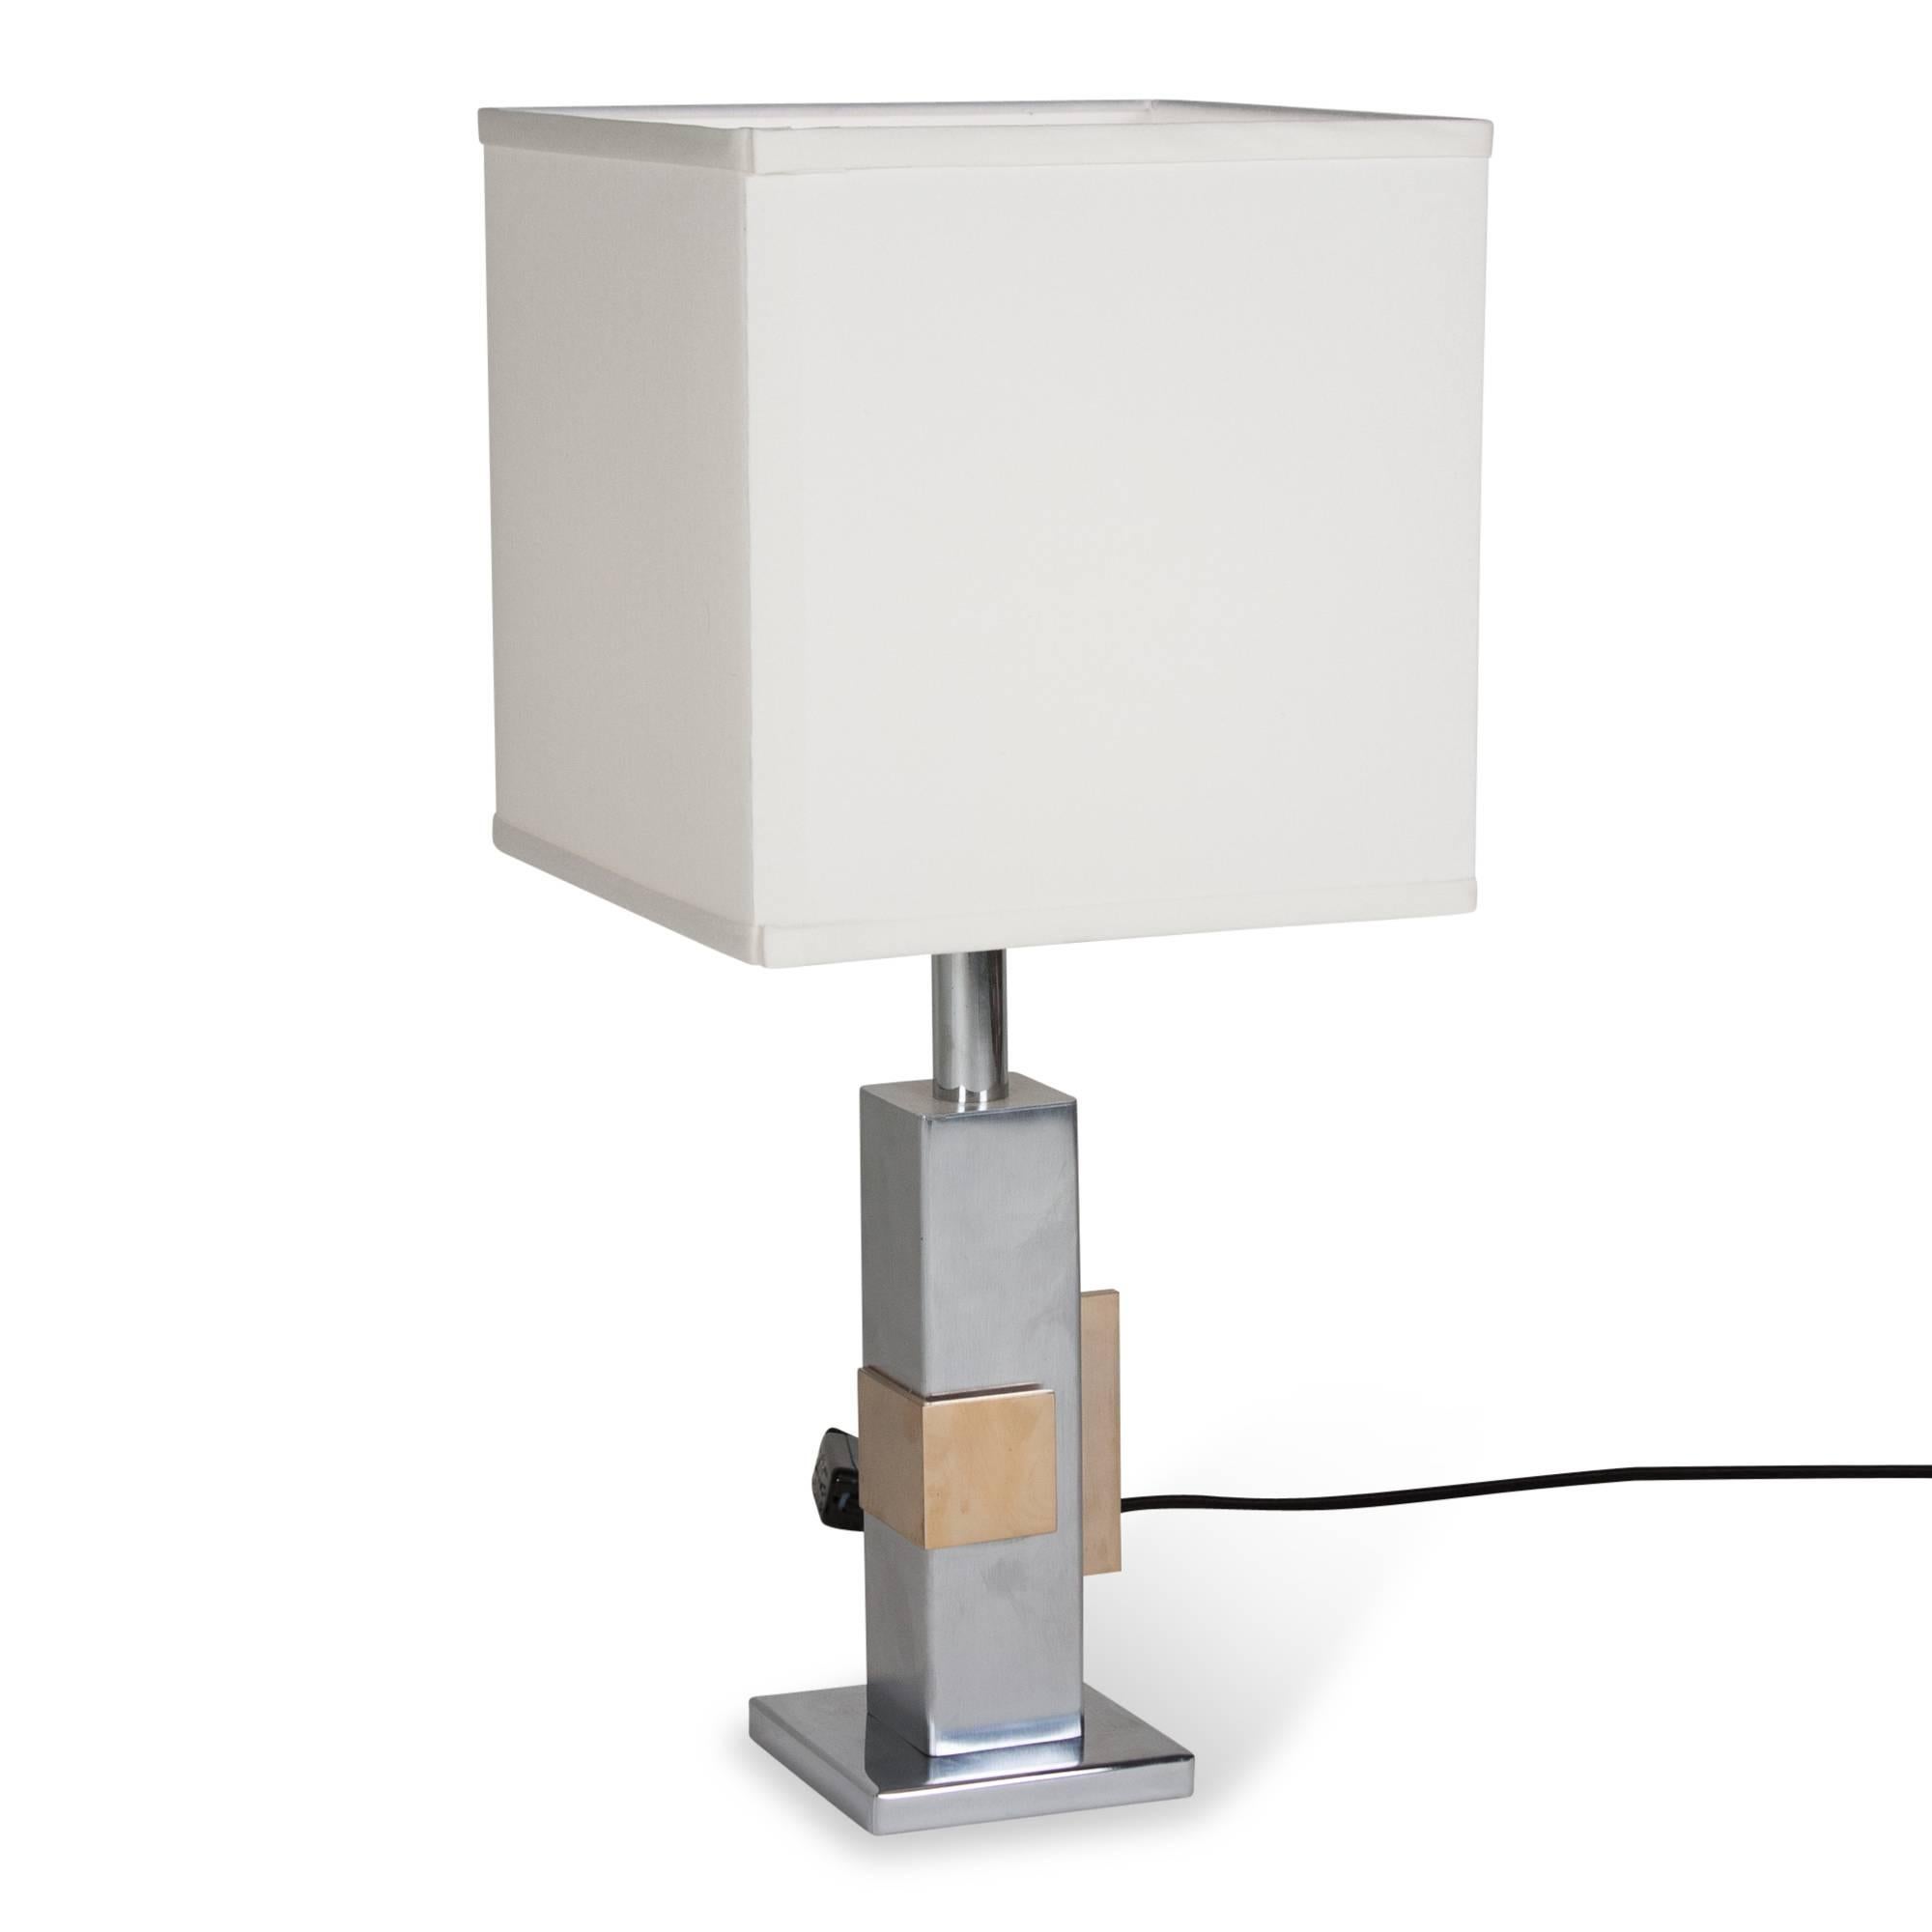 Chrome and bronze table lamp, the square chrome column having two applied bronze geometric elements, French, 1970s. Measures: Overall height 22 1/2 in, base measures 4 3/4 in square. Shade measures 10 in cubed.
         